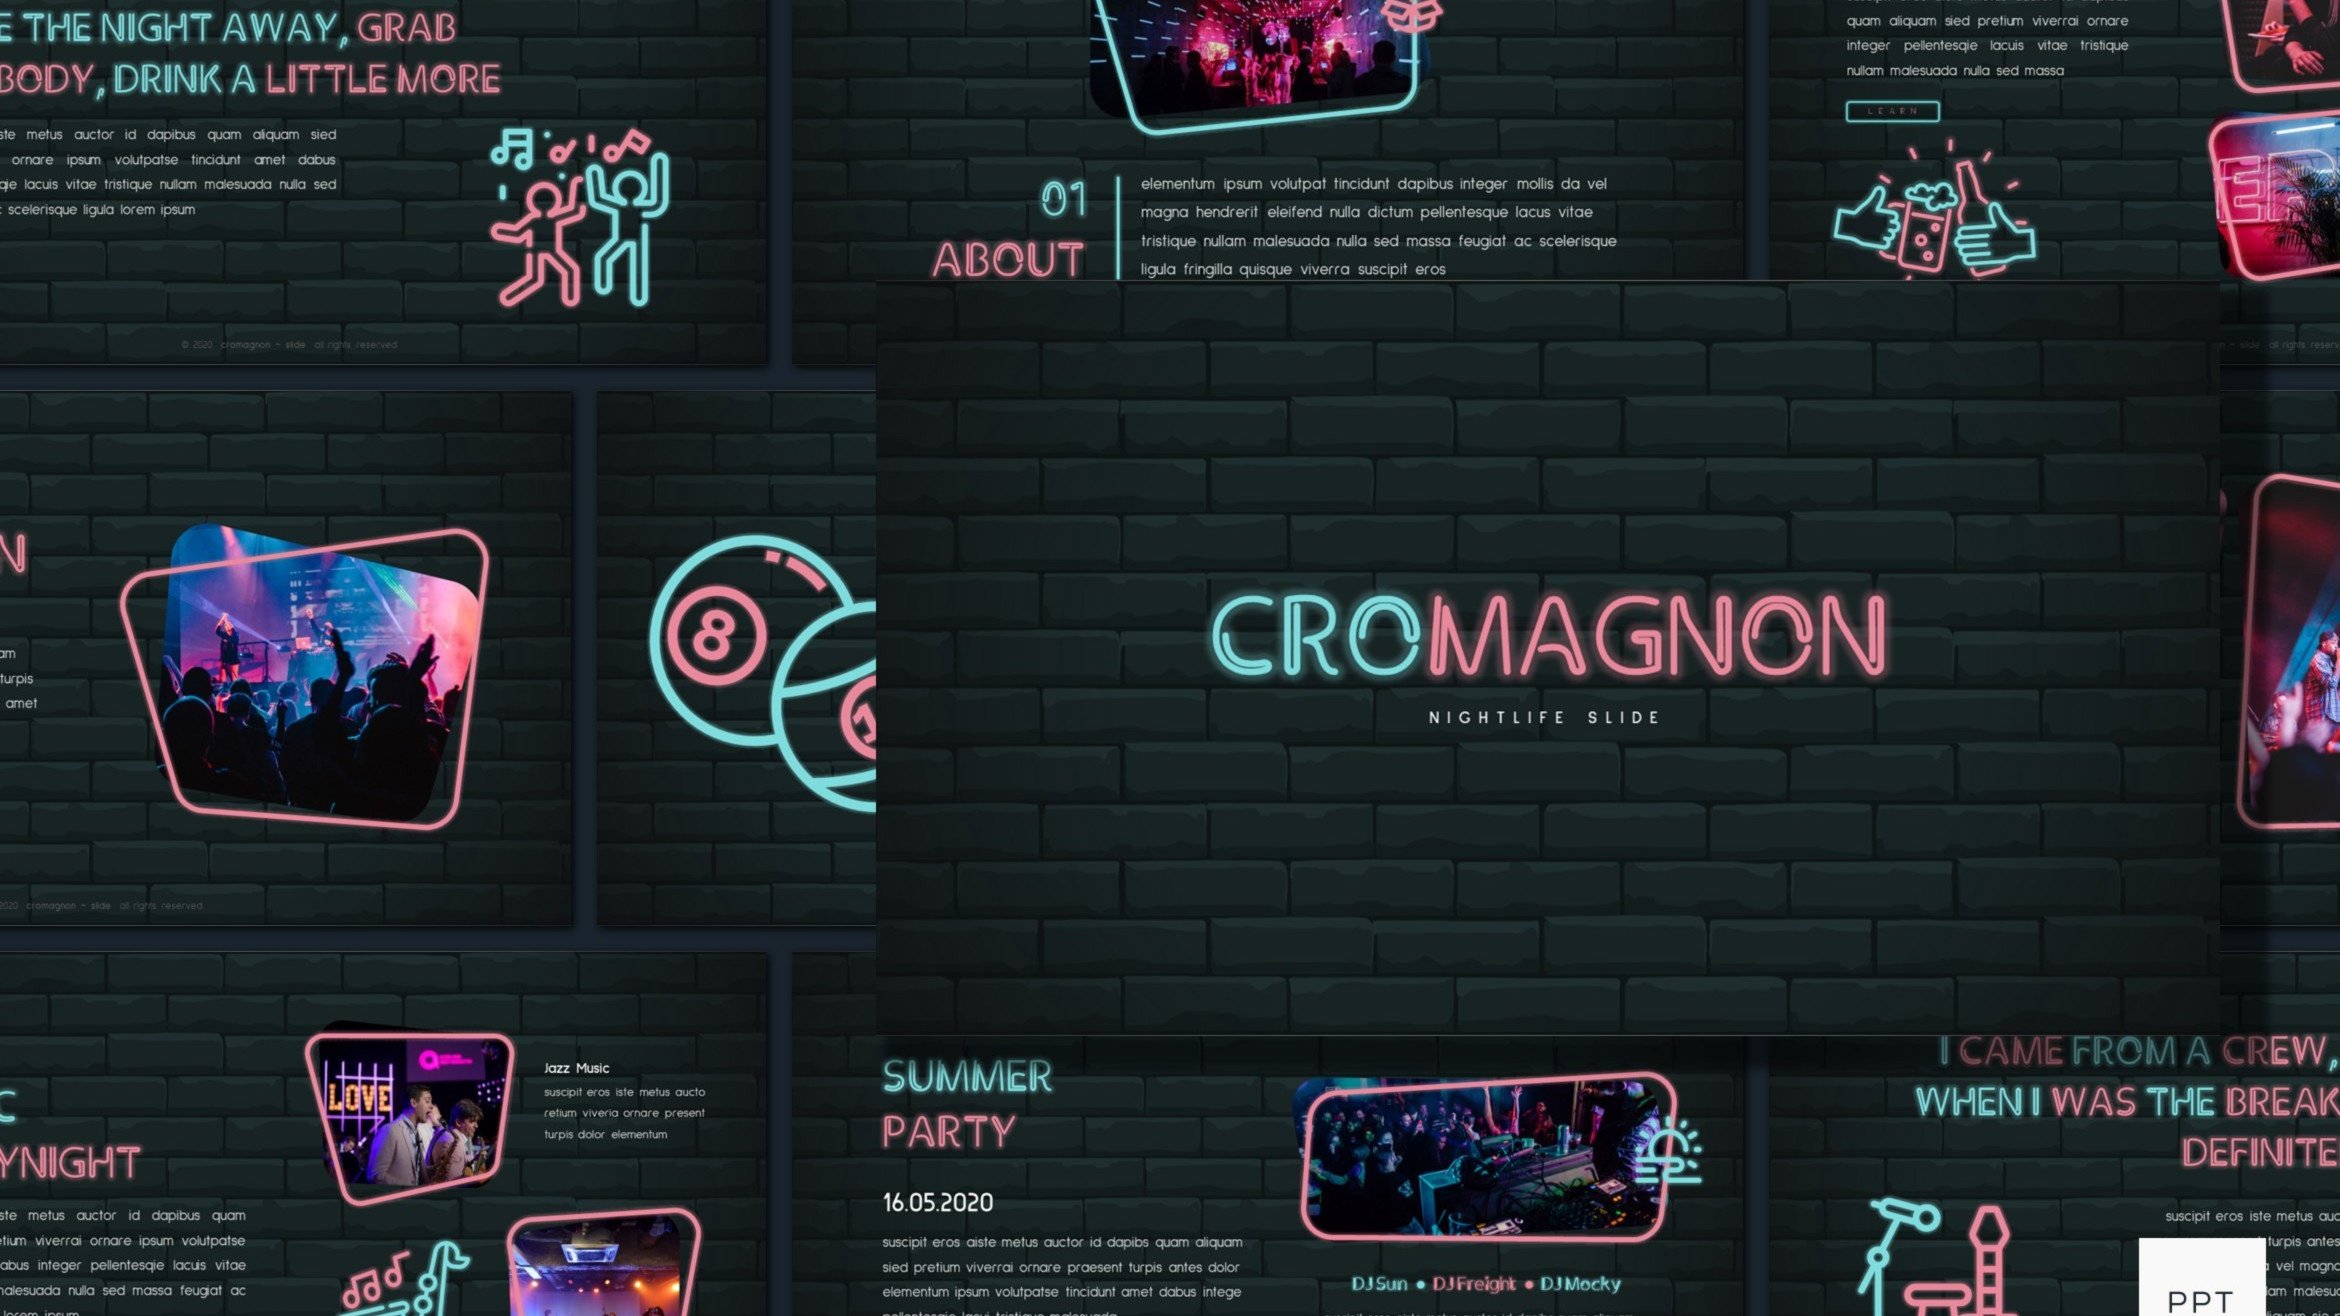 Cromagnon - Creative Nightlife PowerPoint Template for Music, Party, Club (9 Slides)